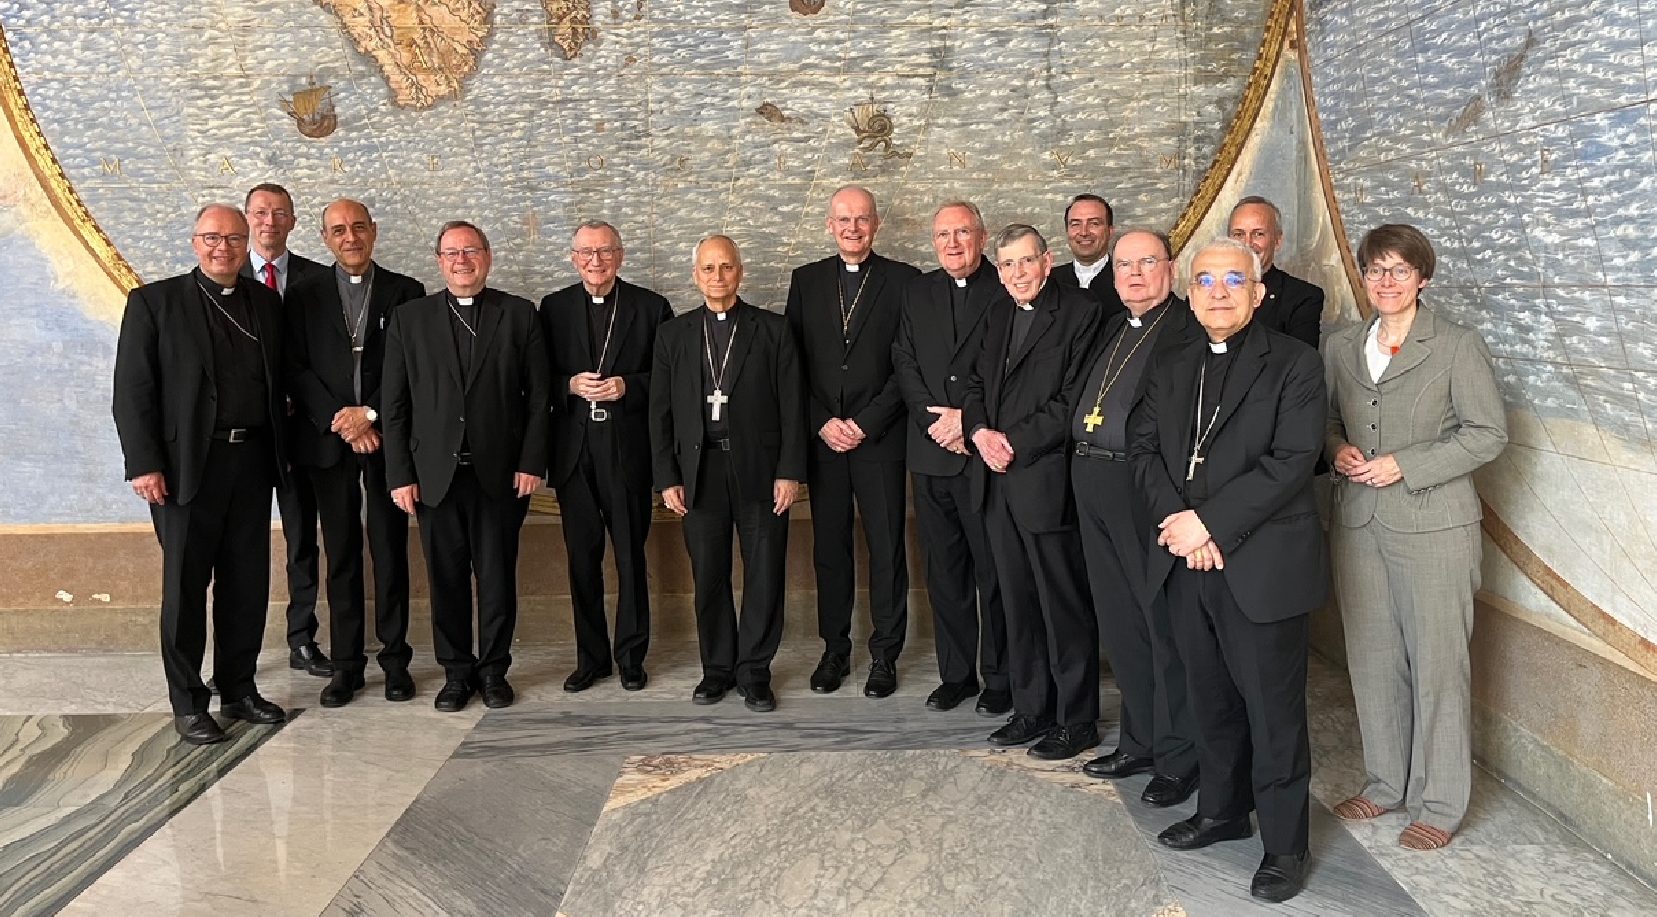 representatives from the Roman Curia and the German Bishops' Conference